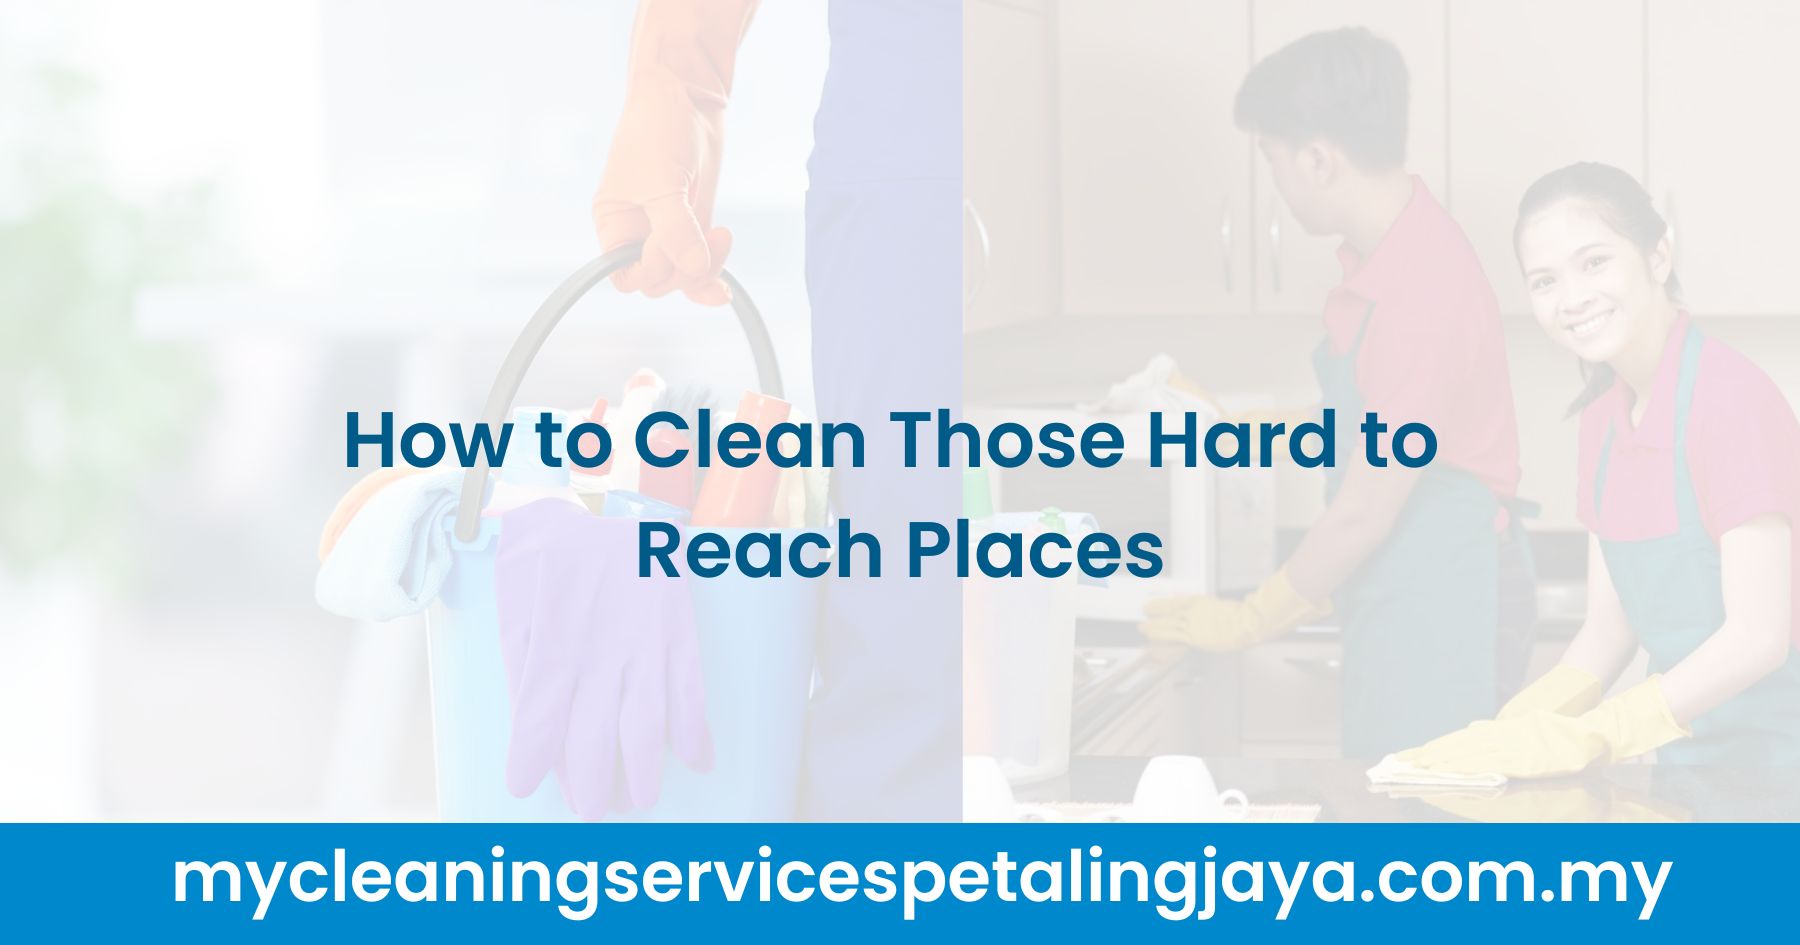 How to Clean Those Hard to Reach Places